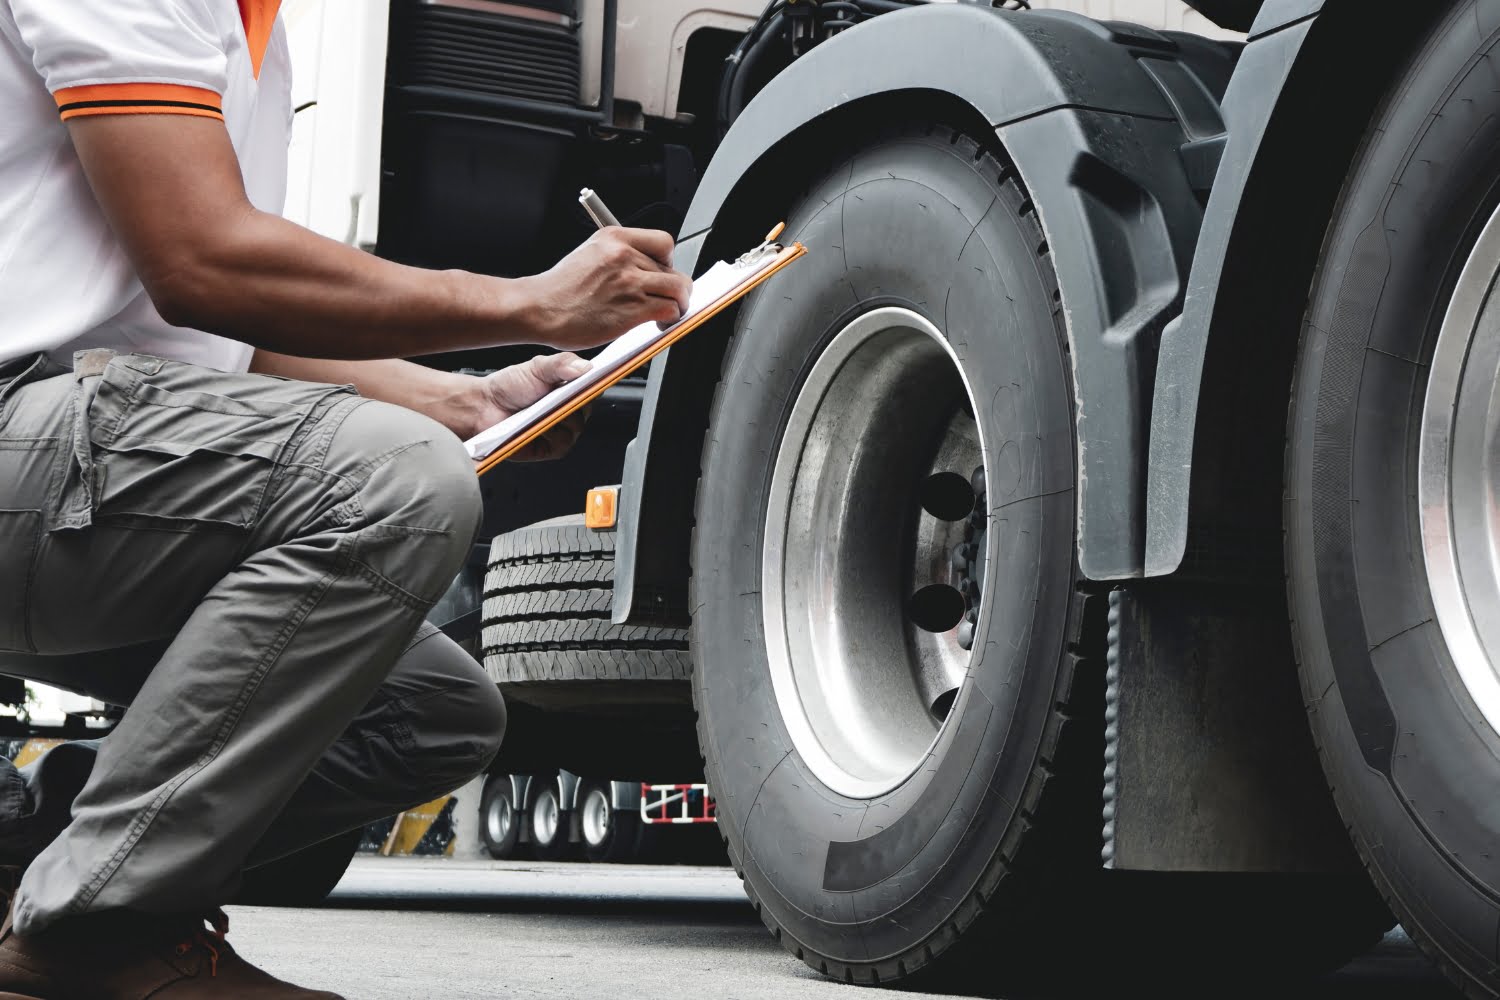 An image of a worker checking a freight truck's tires with a clipboard